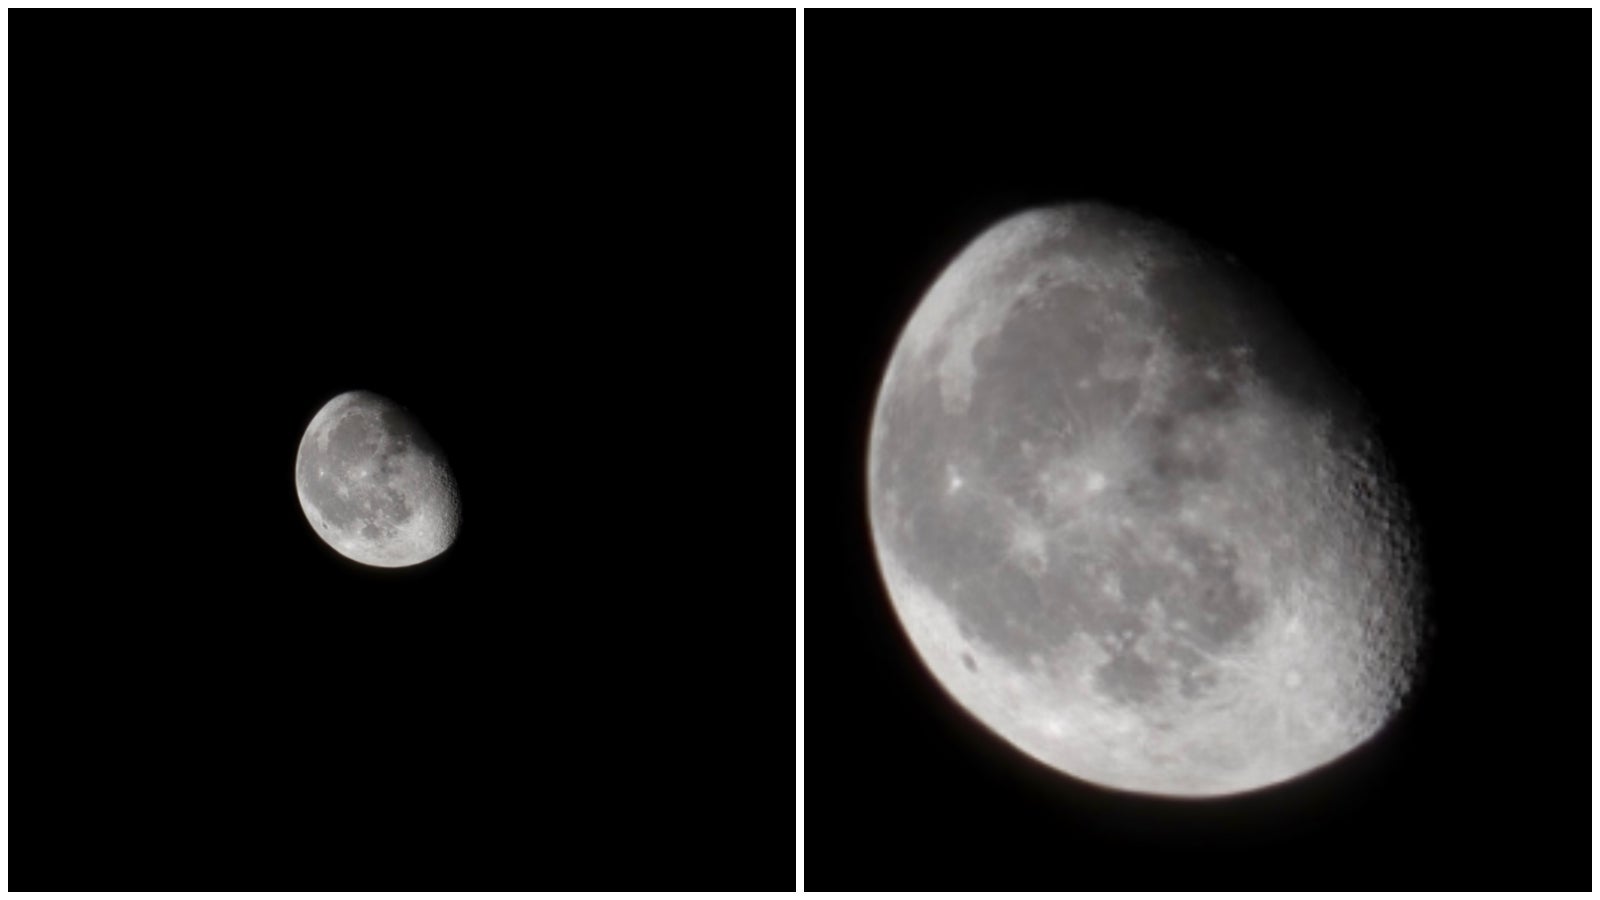 My Galaxy S23 Ultra took these at 30 and 100x zoom. But are they photos of enhanced images? Does it matter to you? - Yes, your moon photos are sort of “fake” but nothing to apologize for (Samsung breaks silence)